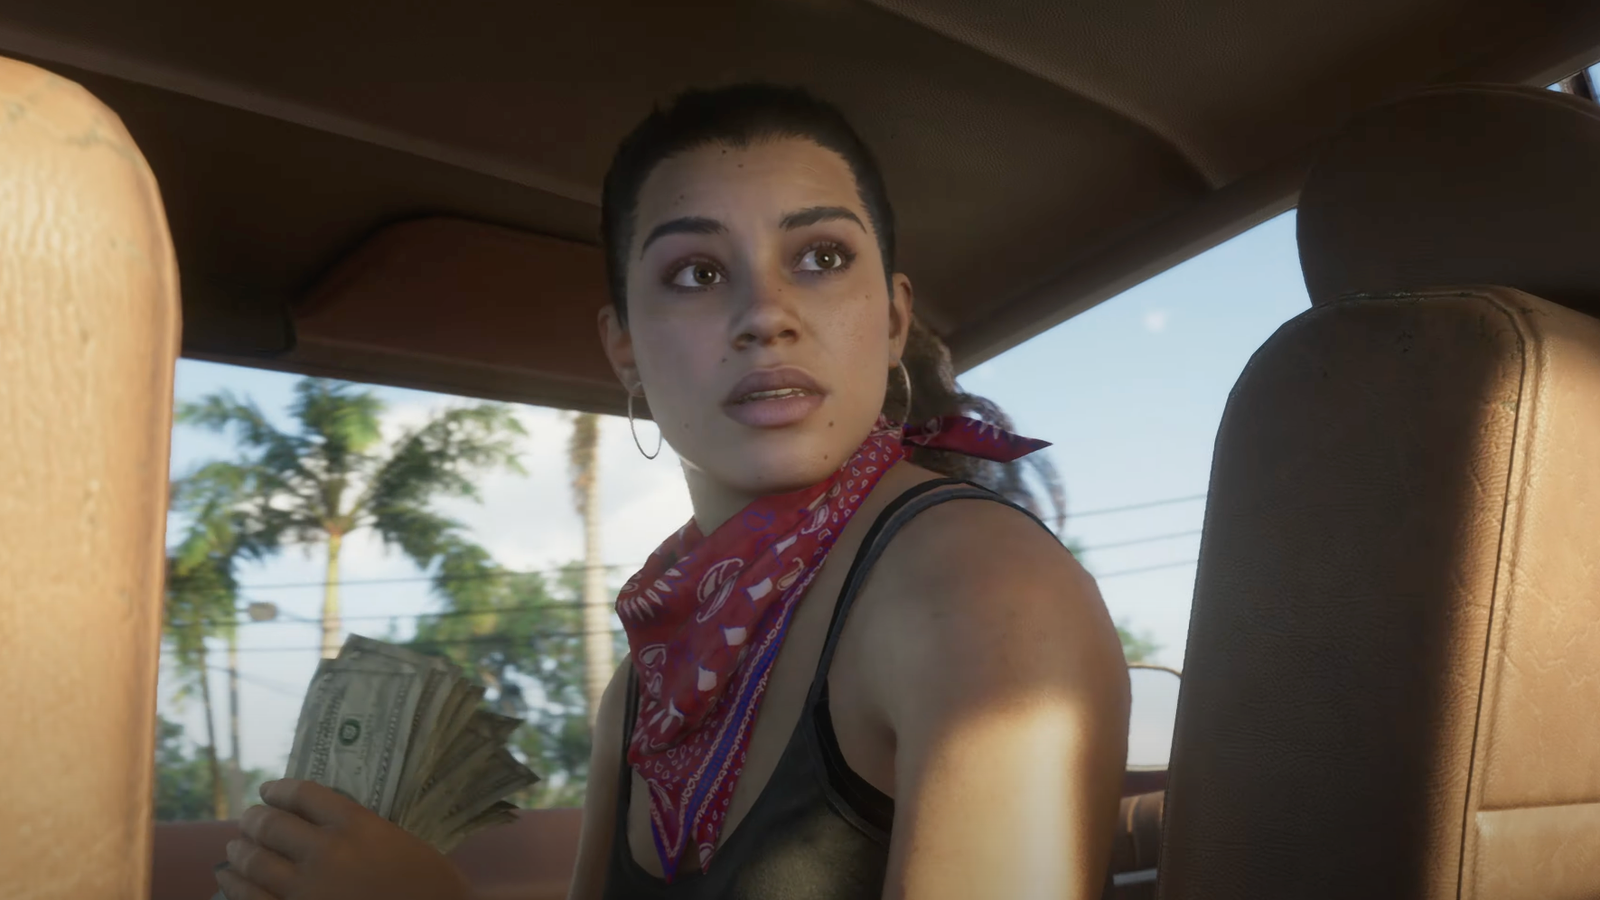 GTA VI trailer: What we learned from first look at next Grand Theft Auto